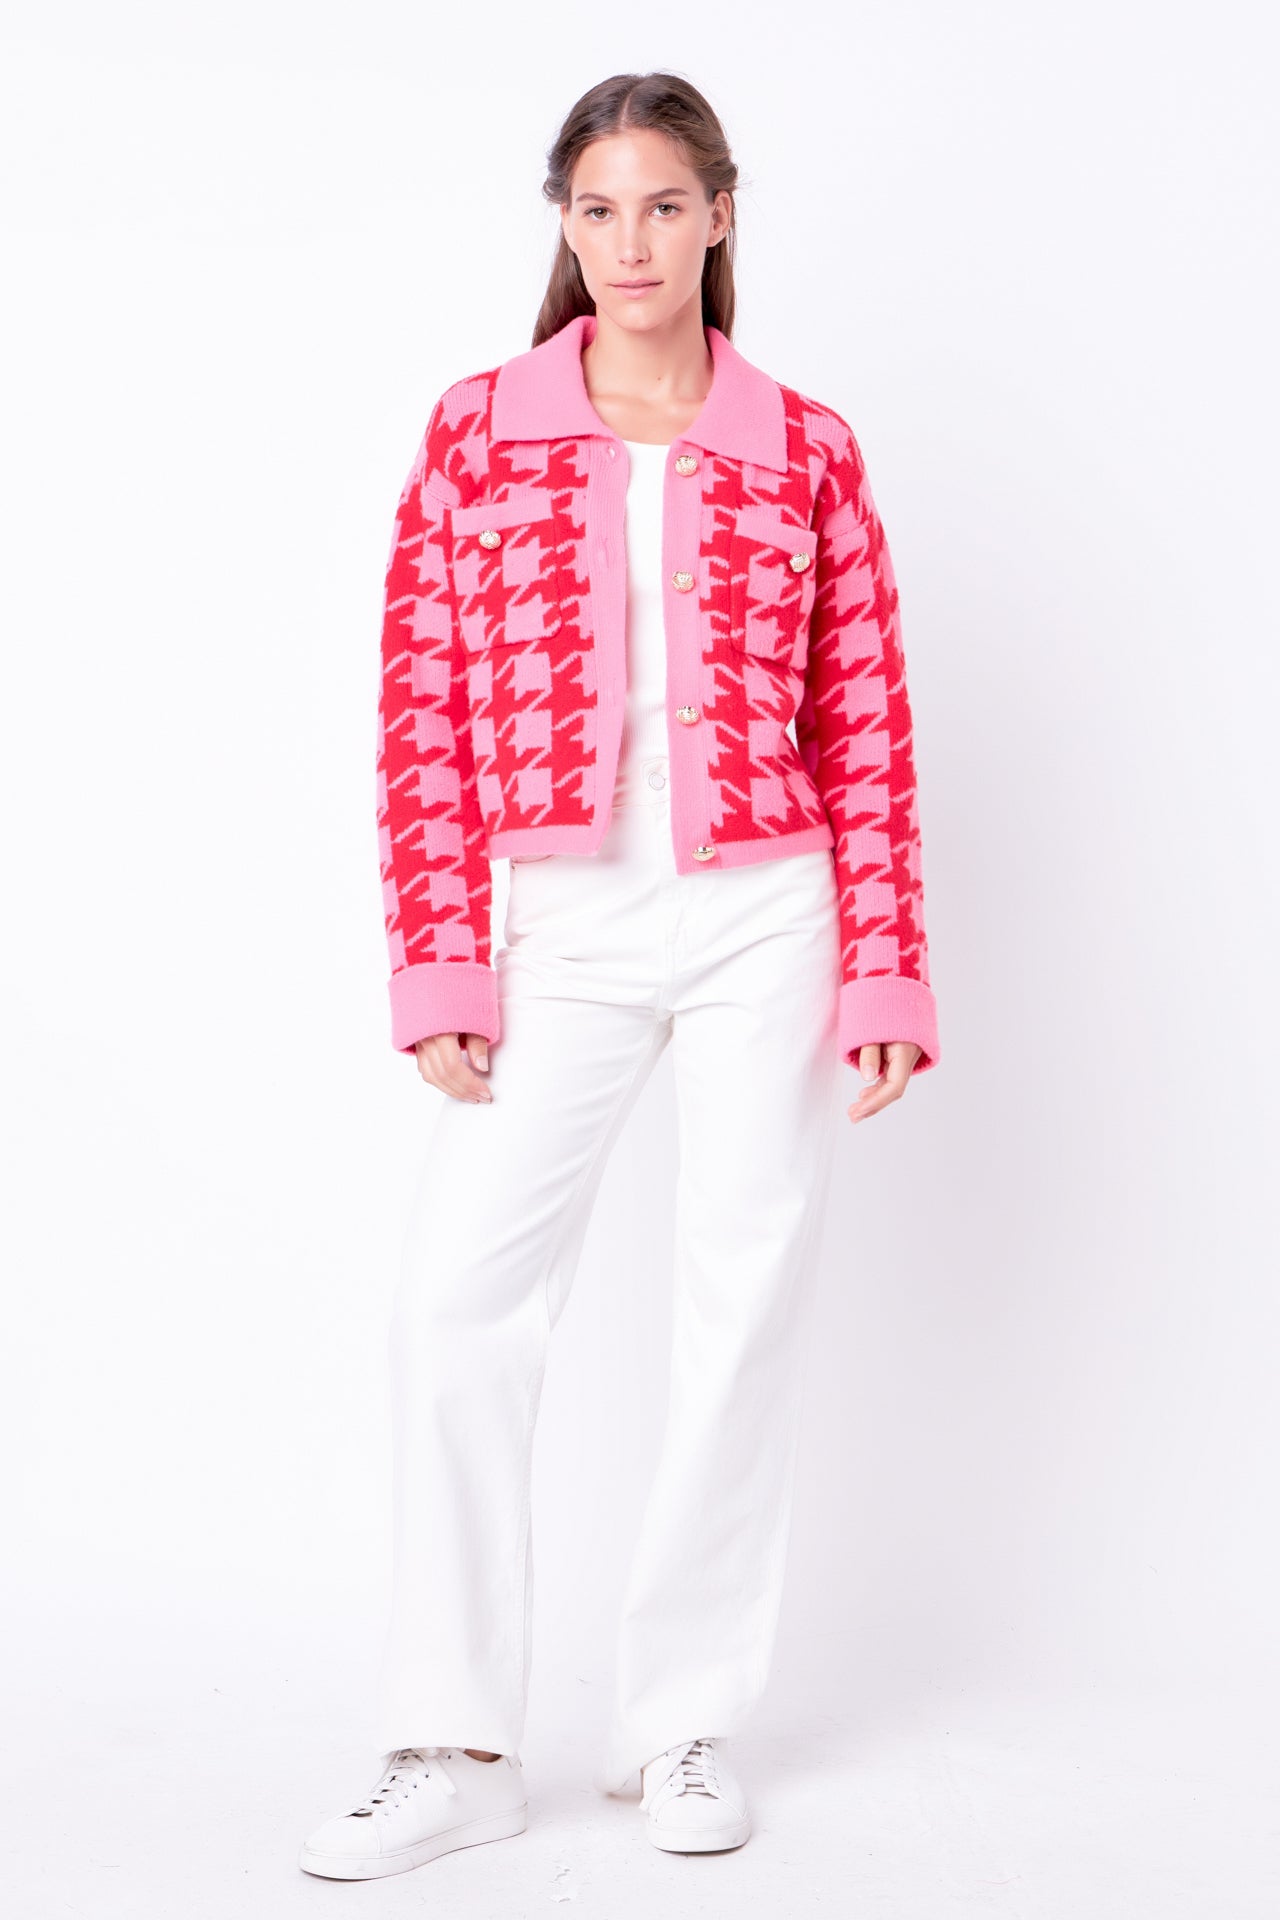 ENGLISH FACTORY - Houndstooth Collared Cardigan - JACKETS available at Objectrare